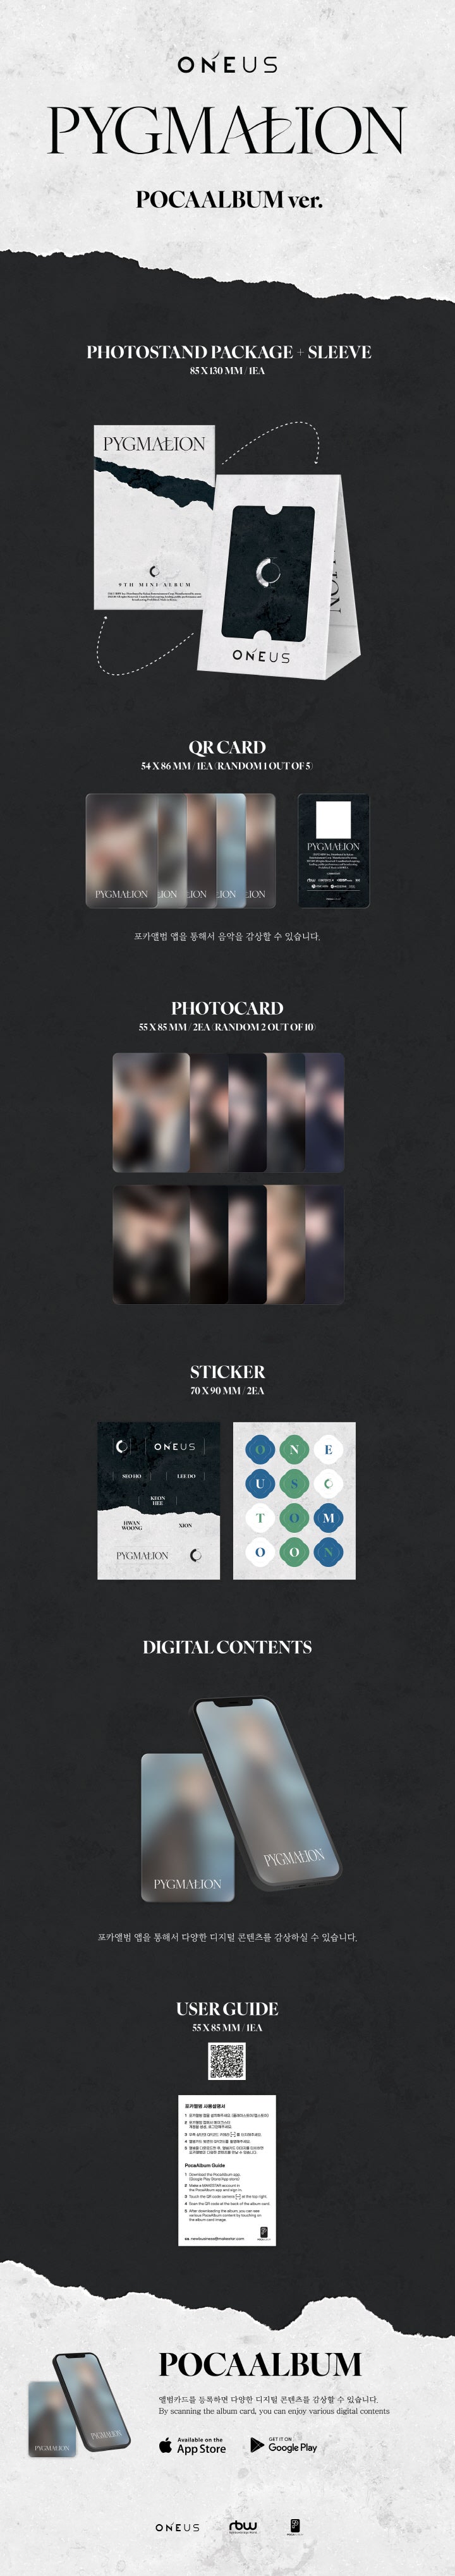 1 QR Card (random out of 5 types)
2 Photo Cards (random out of 10 types)
2 Stickers